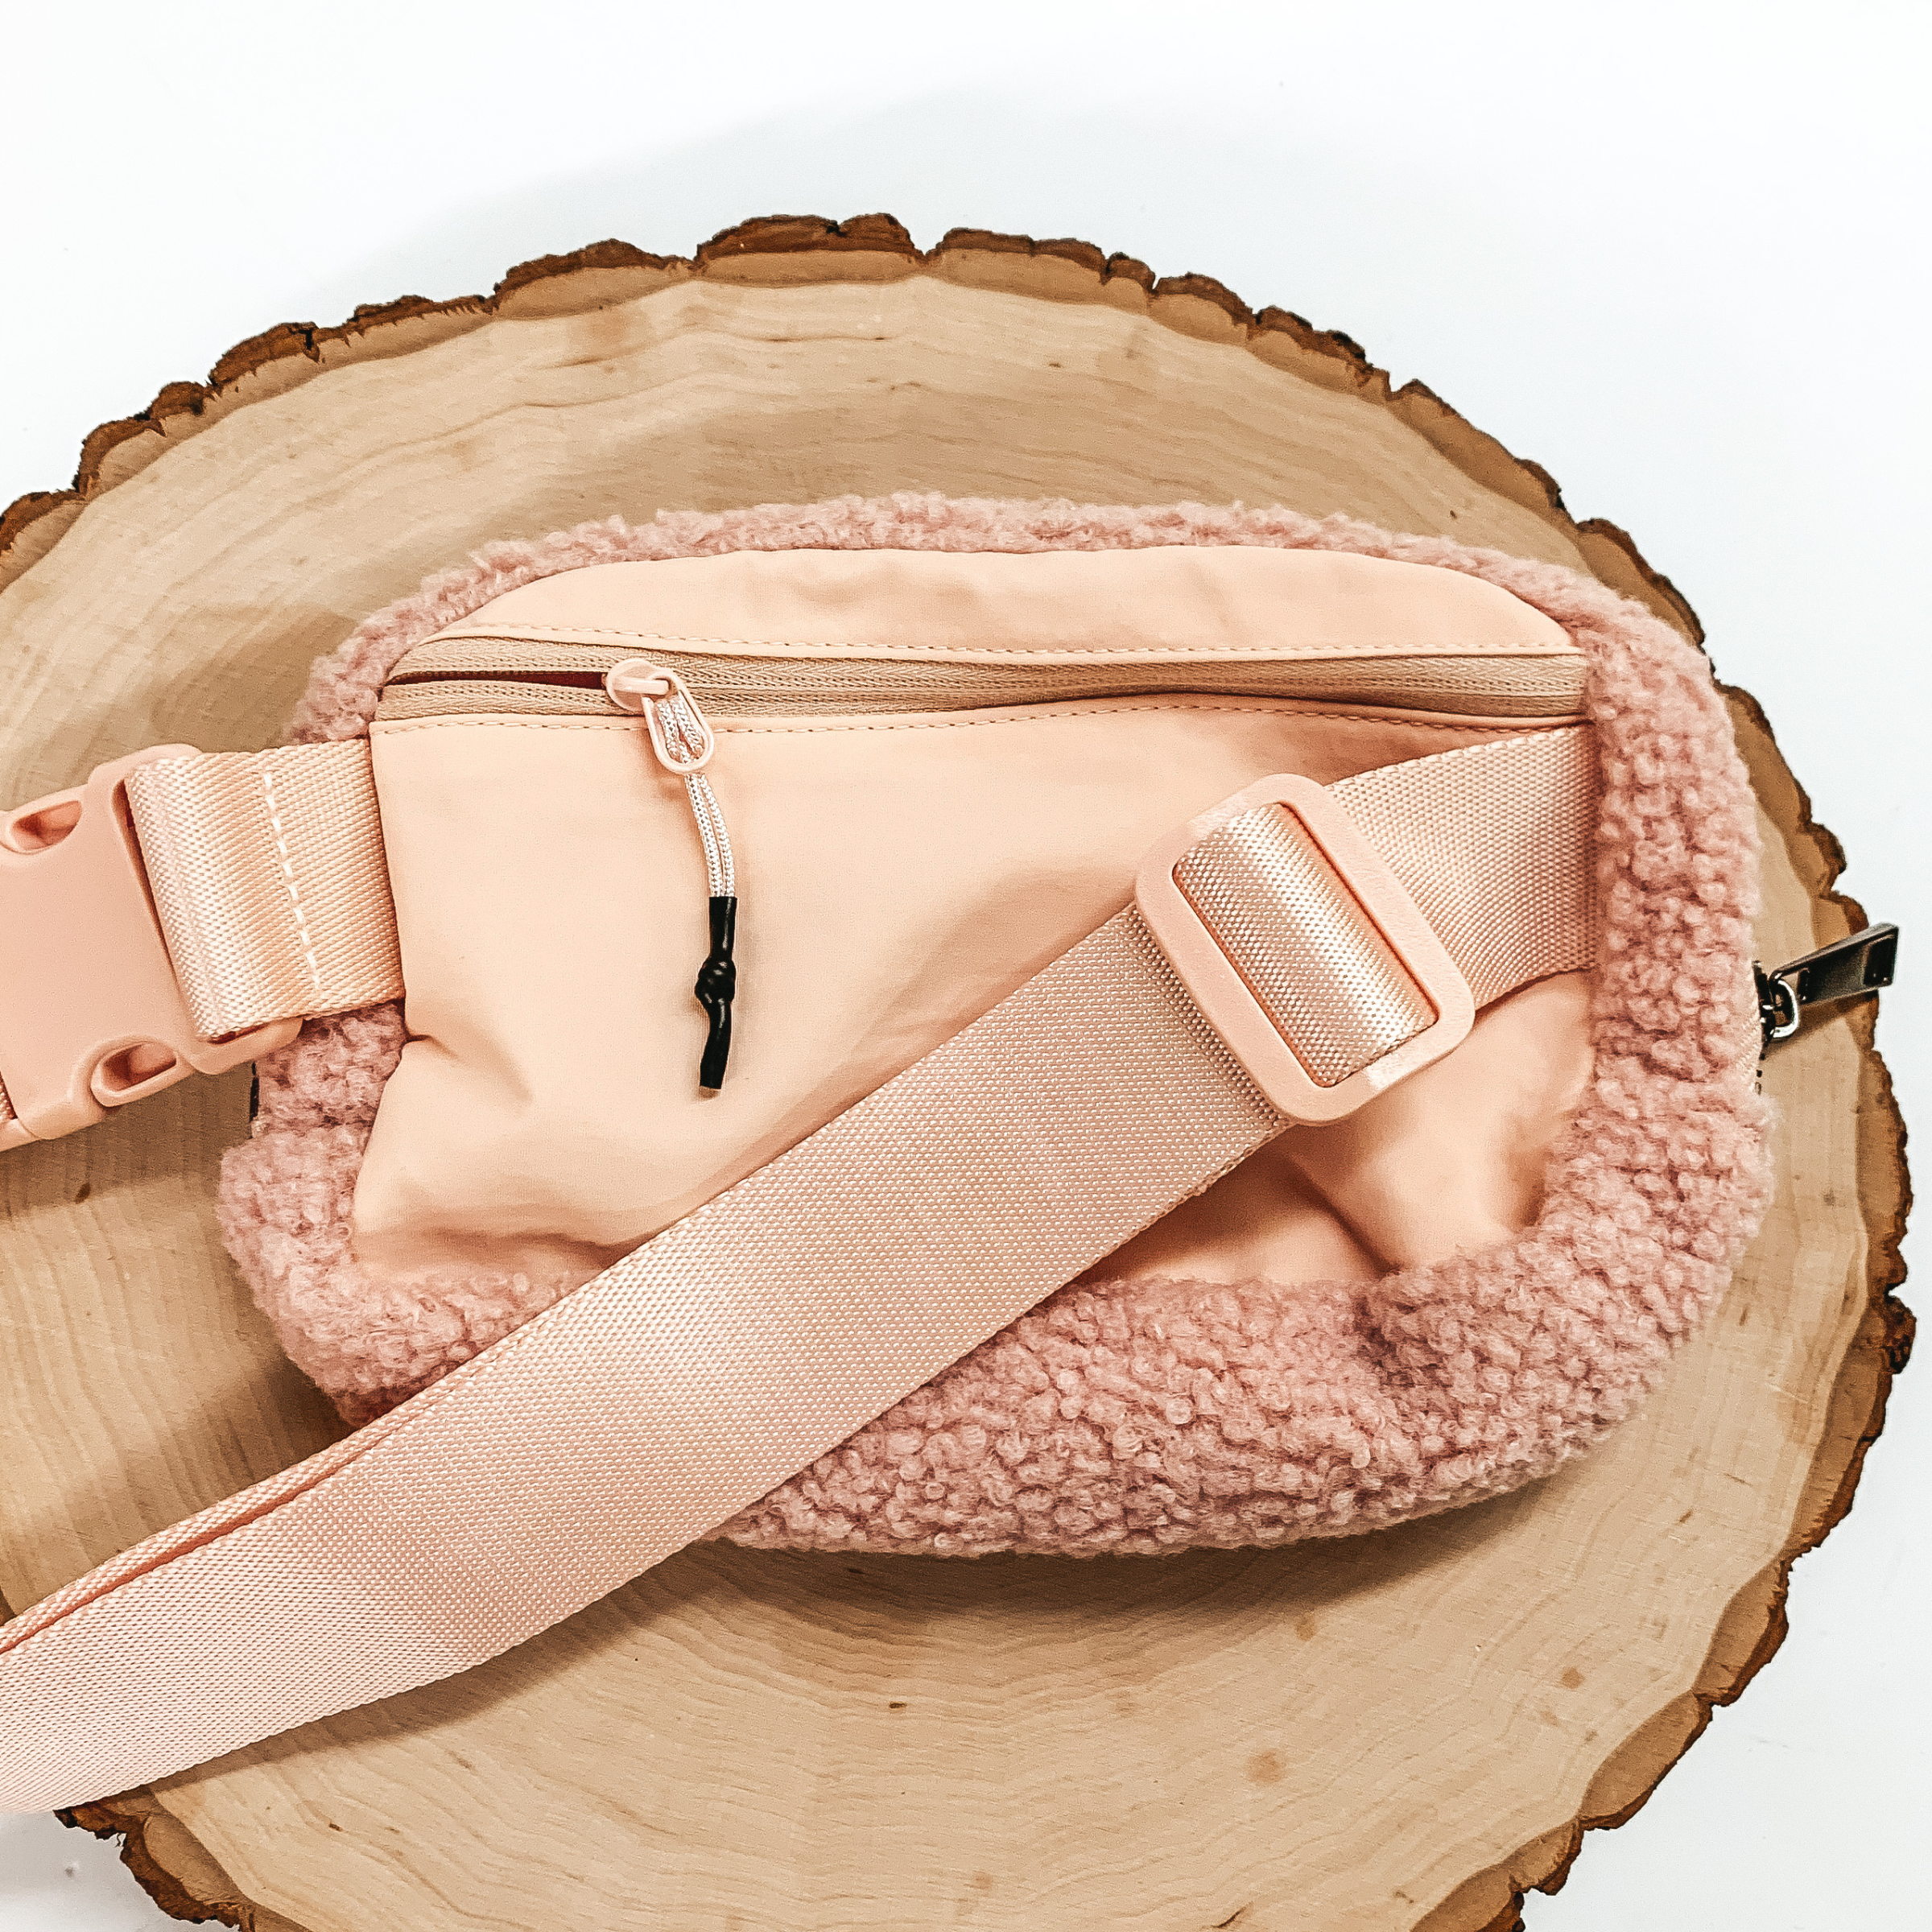 Headed to Aspen Sherpa Fanny Pack in Blush Pink - Giddy Up Glamour Boutique